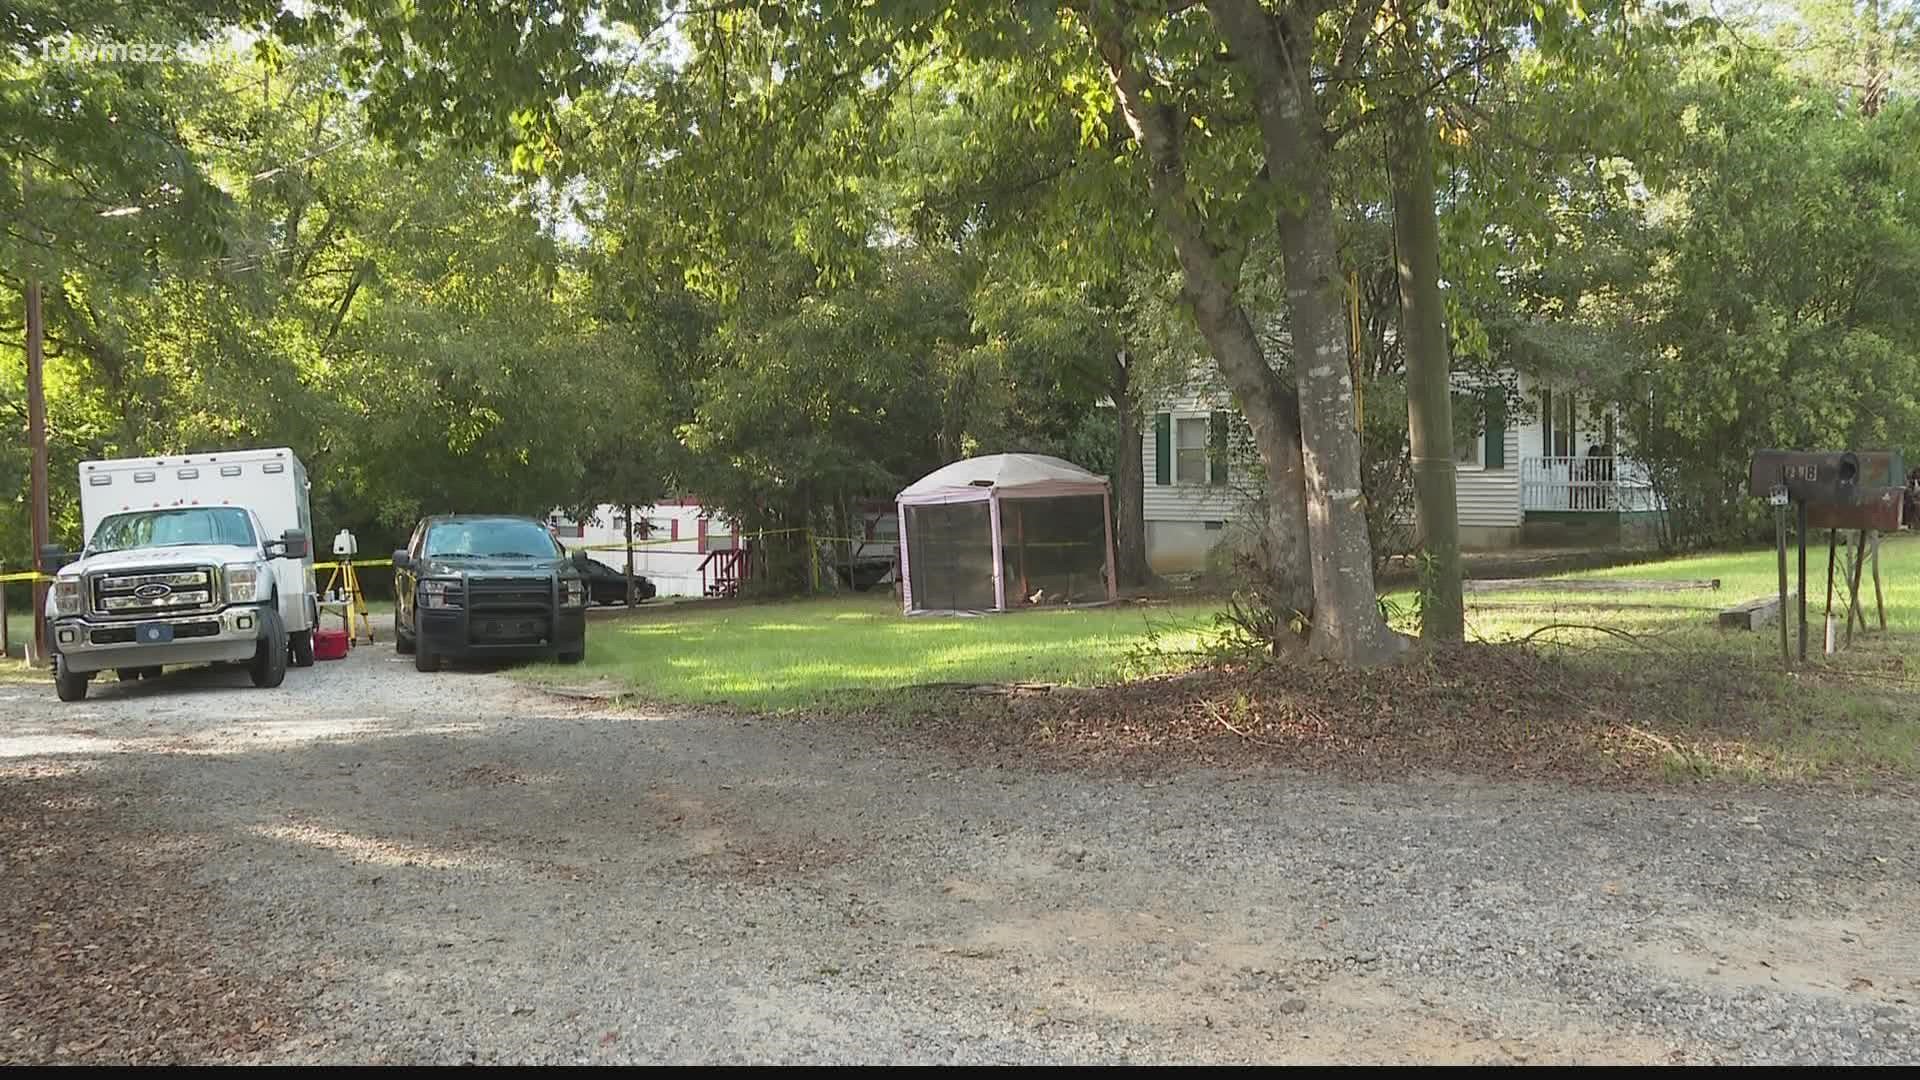 Local, state and federal investigators are looking into a deadly shooting of a Milledgeville man in his home.